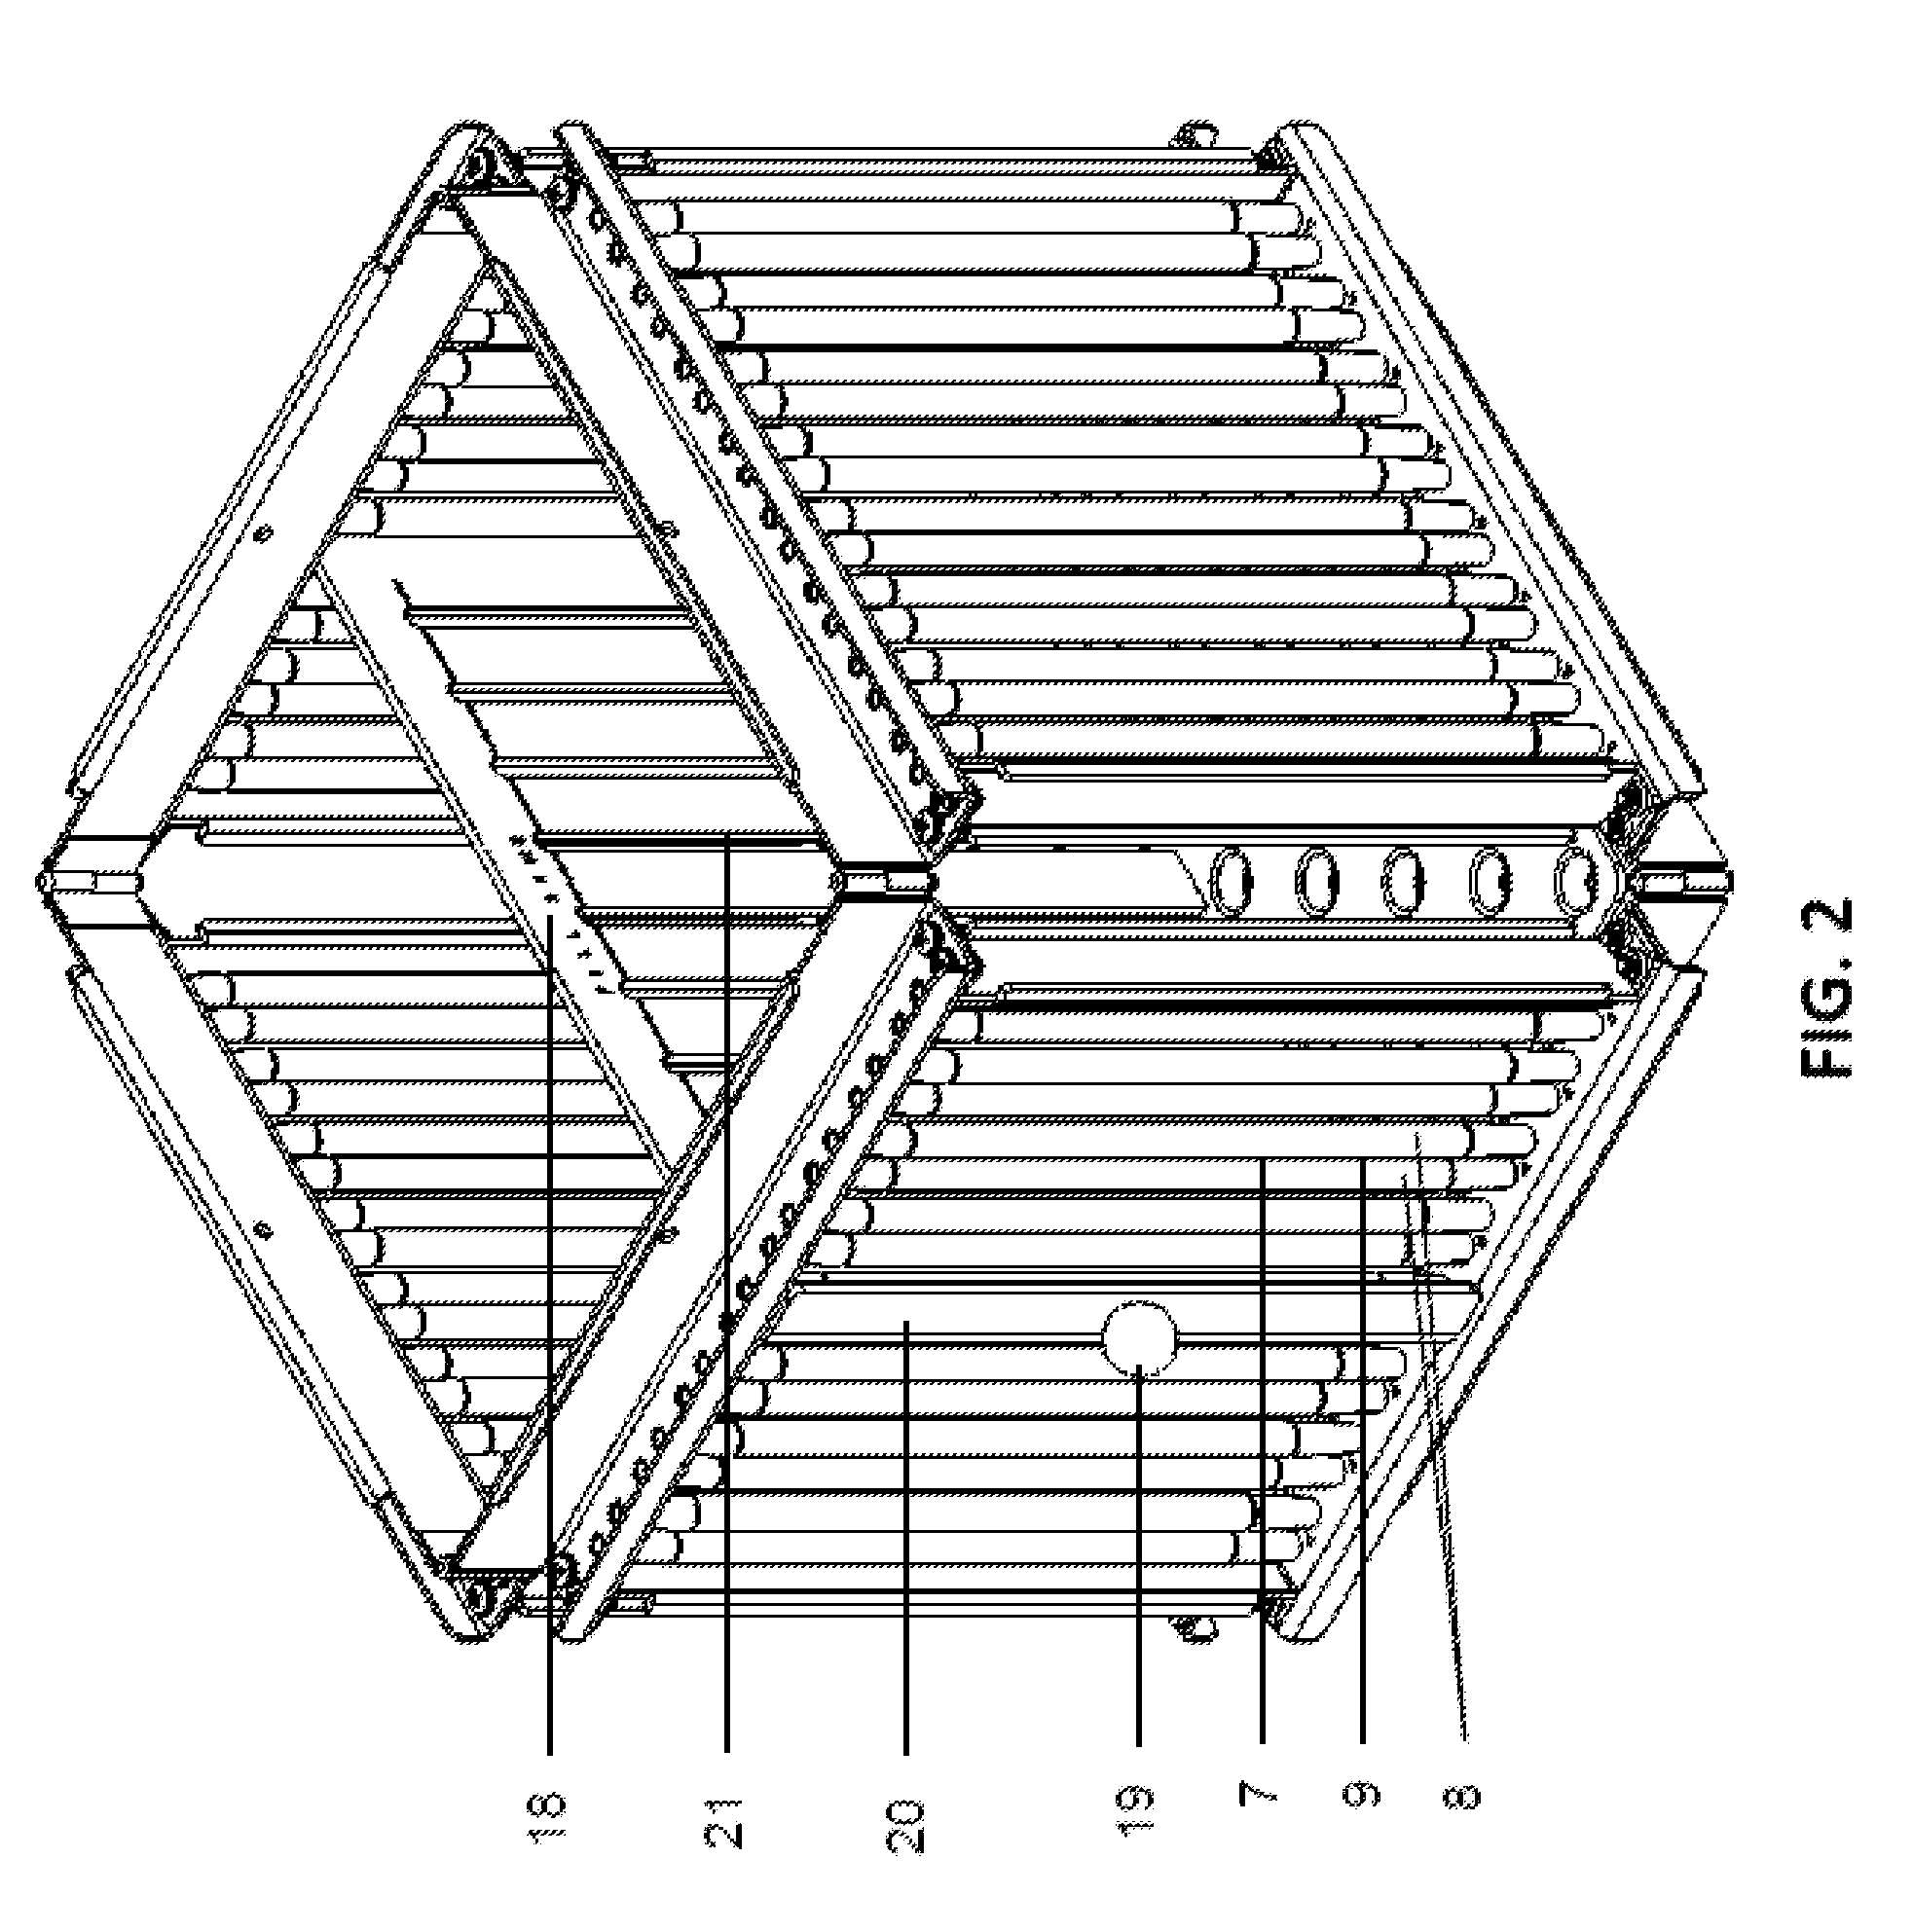 Meat cubing and skewering device